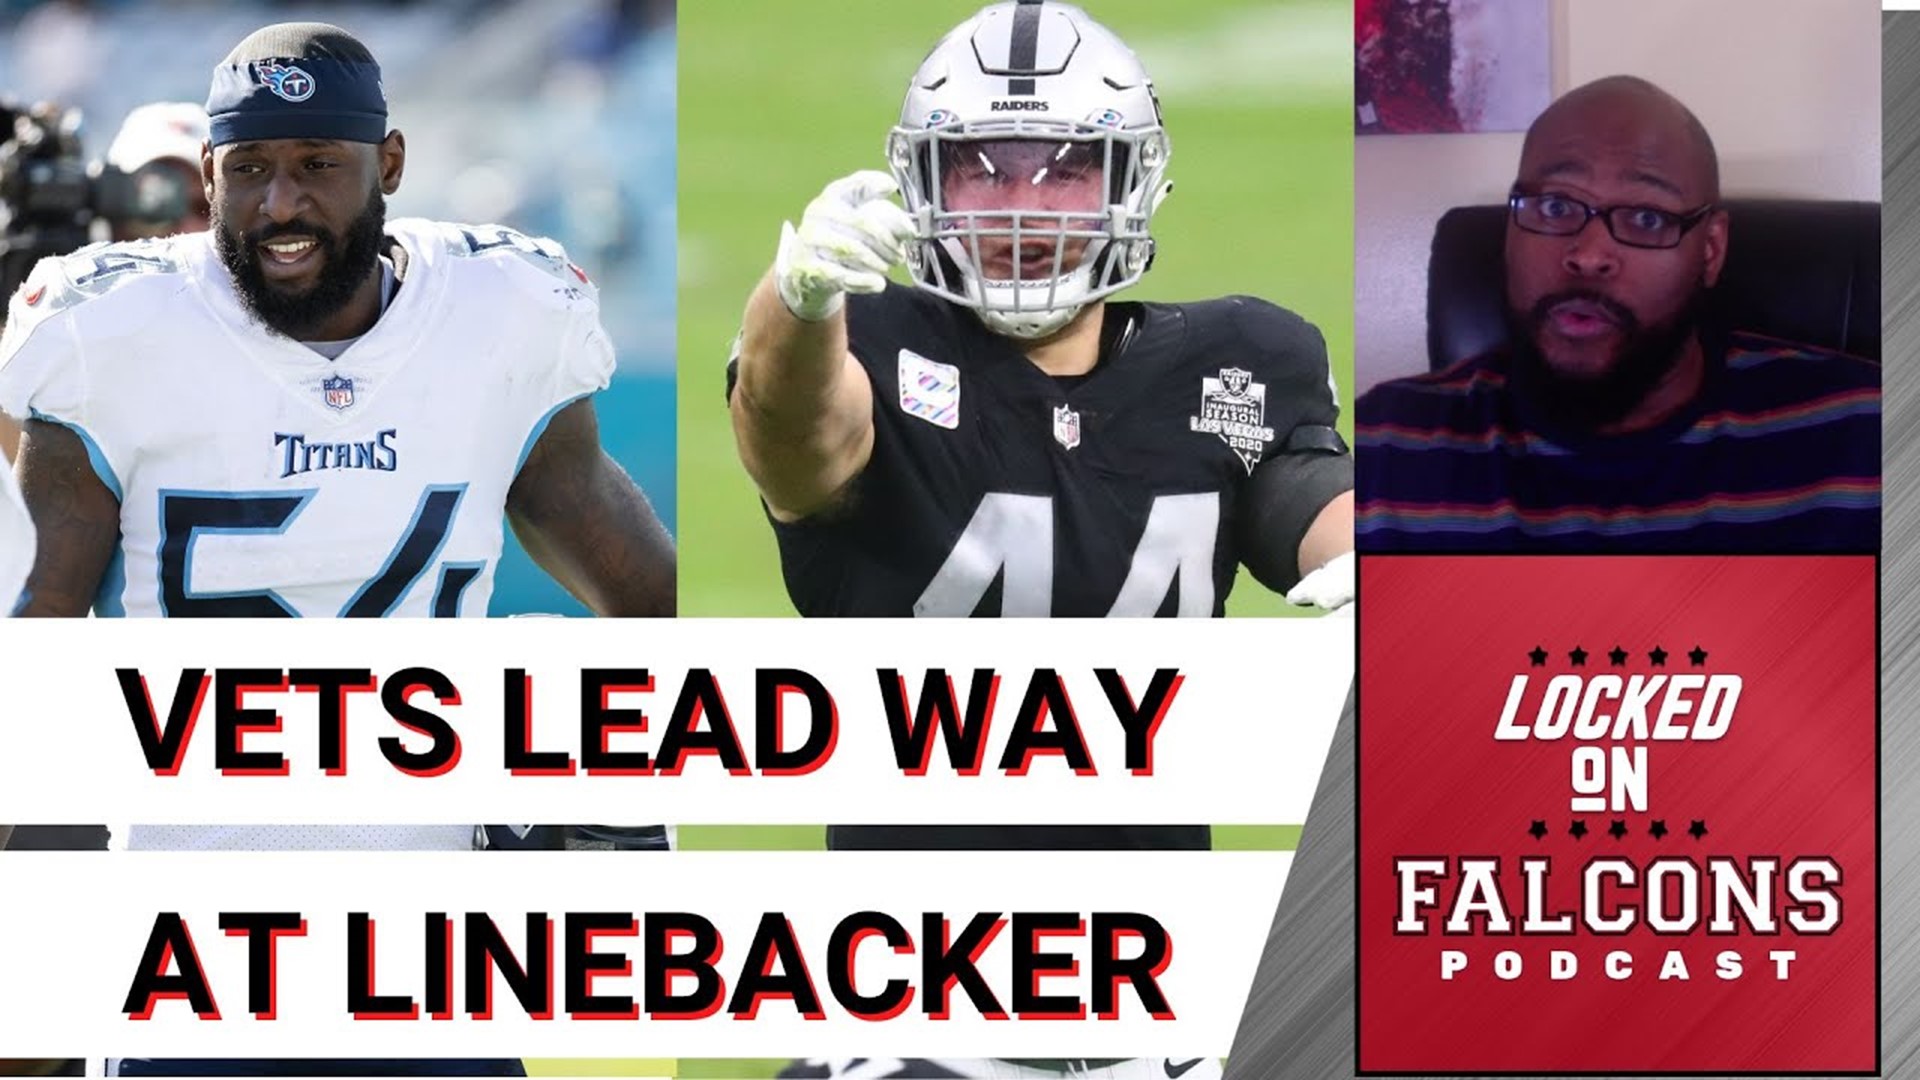 Aaron breaks down the Atlanta Falcons linebackers, discussing one of the few positions on roster that will have competition for starting spots later this summer.